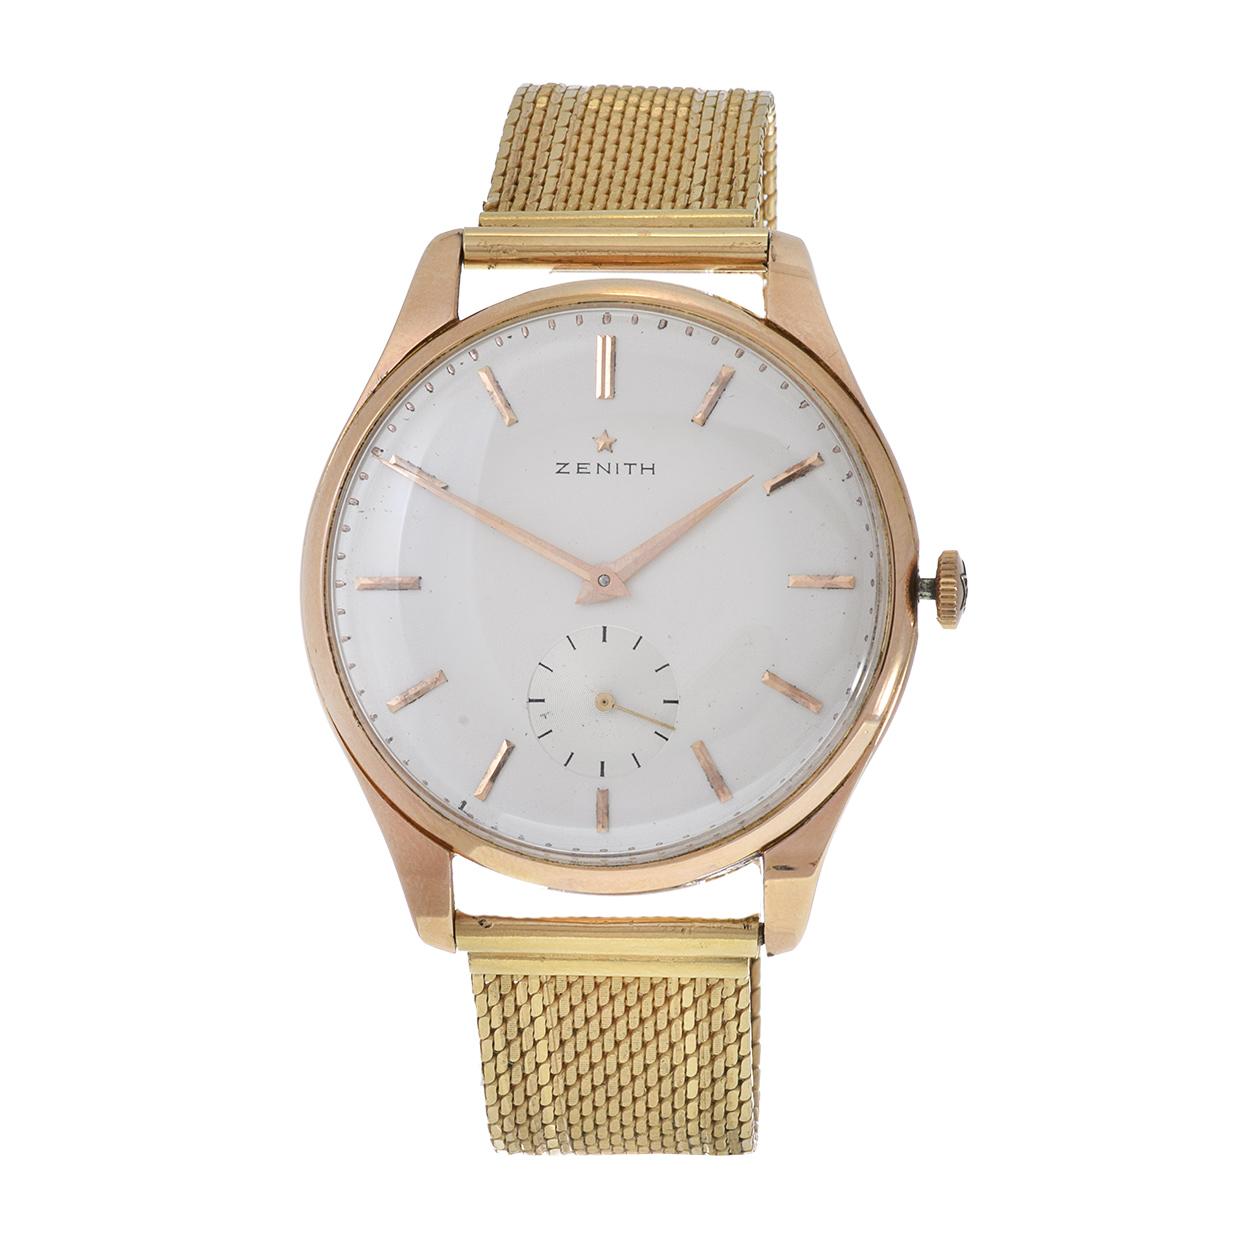 Indulge in timeless elegance with our Vintage 1960s Zenith 38mm 18KT Gold Case and Bracelet Watch. This classic timepiece features a Zenith caliber 40 17 jewel manual wind movement, a champagne dial adorned with gold stick markers, and a sub-dial